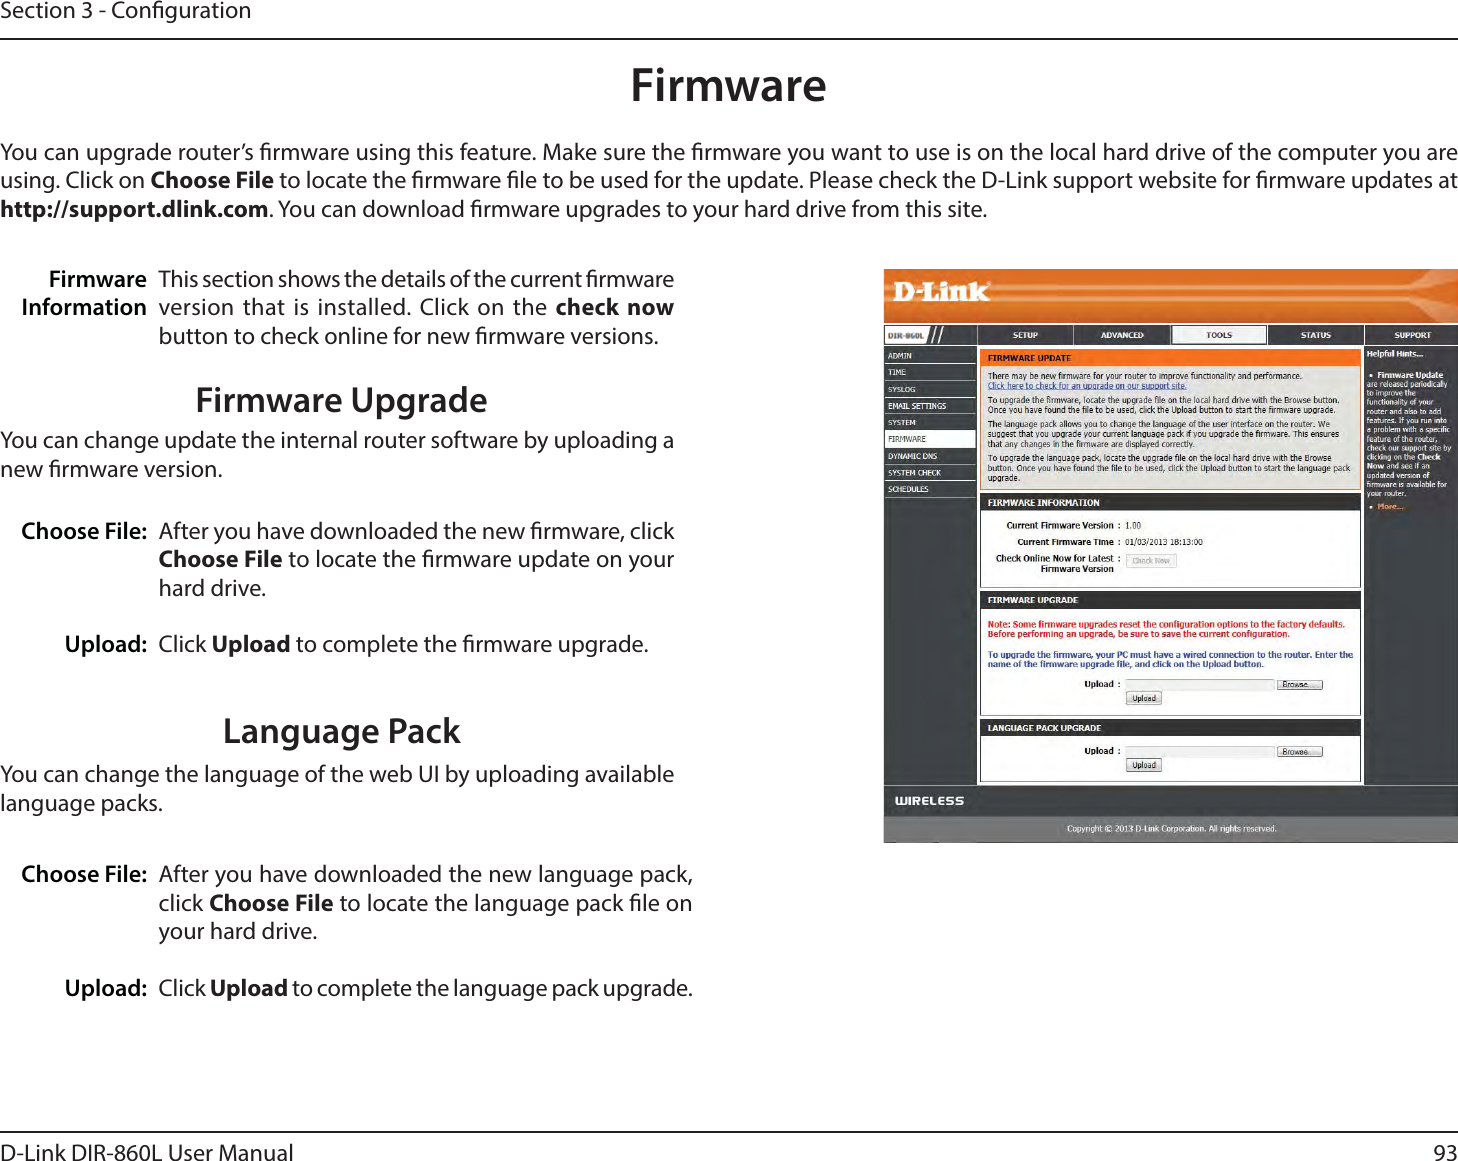 93D-Link DIR-860L User ManualSection 3 - CongurationFirmwareChoose File:Upload:After you have downloaded the new rmware, click Choose File to locate the rmware update on your hard drive.Click Upload to complete the rmware upgrade.You can upgrade router’s rmware using this feature. Make sure the rmware you want to use is on the local hard drive of the computer you are using. Click on Choose File to locate the rmware le to be used for the update. Please check the D-Link support website for rmware updates at IUUQTVQQPSUEMJOLDPN. You can download rmware upgrades to your hard drive from this site.After you have downloaded the new language pack, click Choose File to locate the language pack le on your hard drive.Click Upload to complete the language pack upgrade.Language PackYou can change the language of the web UI by uploading available language packs.Choose File:Upload:This section shows the details of the current rmware version that is installed. Click on the check now button to check online for new rmware versions. FirmwareInformationFirmware UpgradeYou can change update the internal router software by uploading a new rmware version.